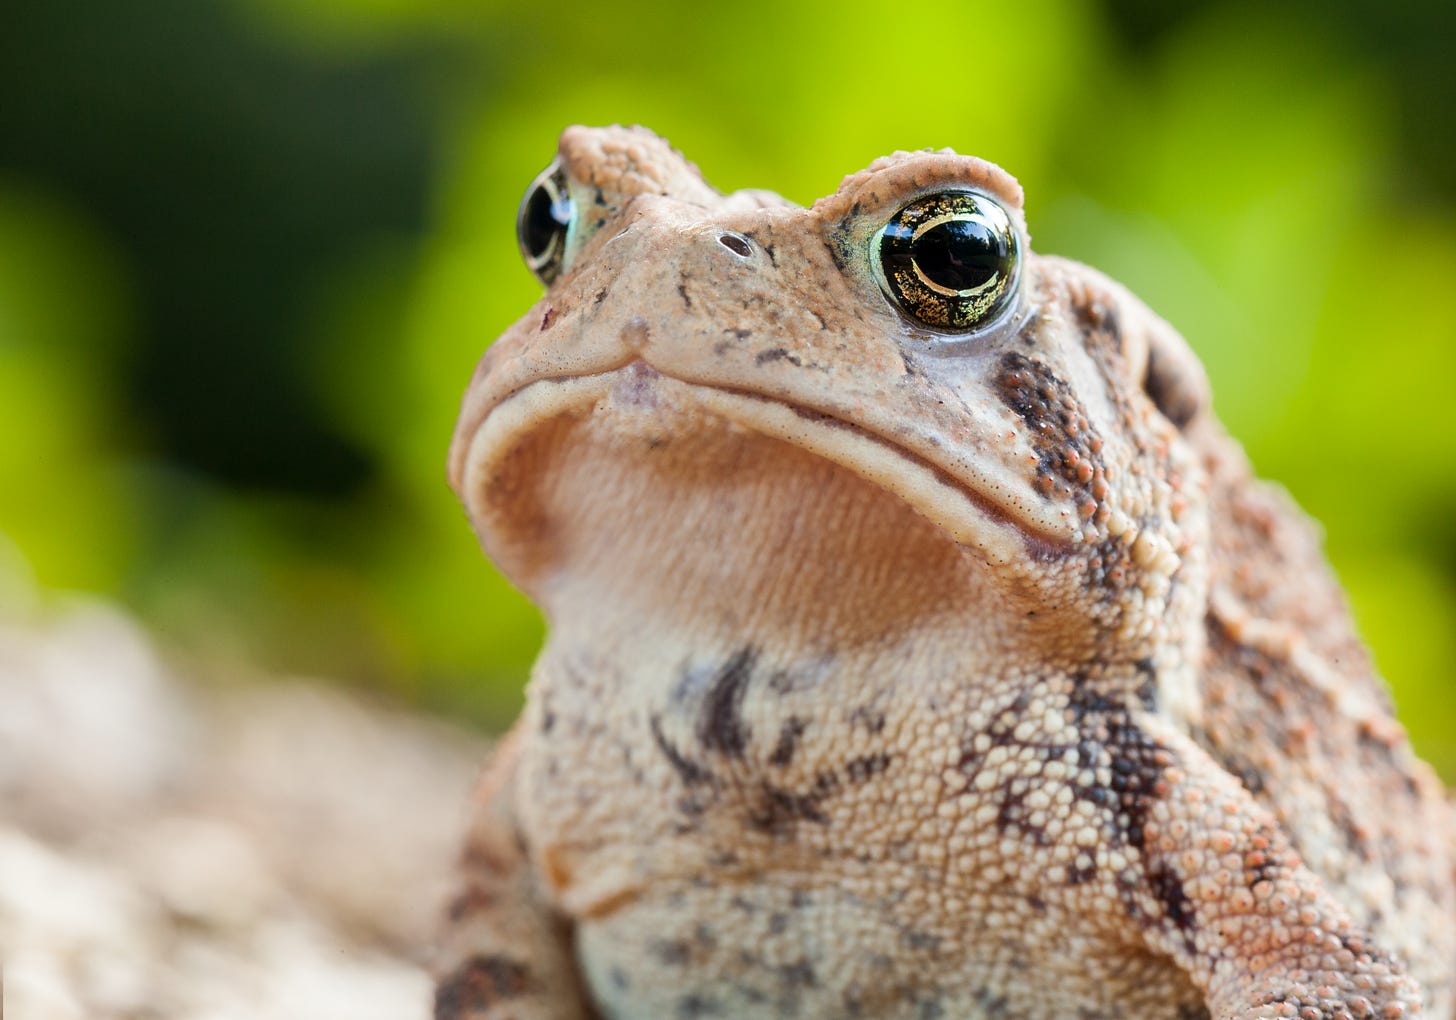 Close-up of an American toad, who looks soulfully into the distance